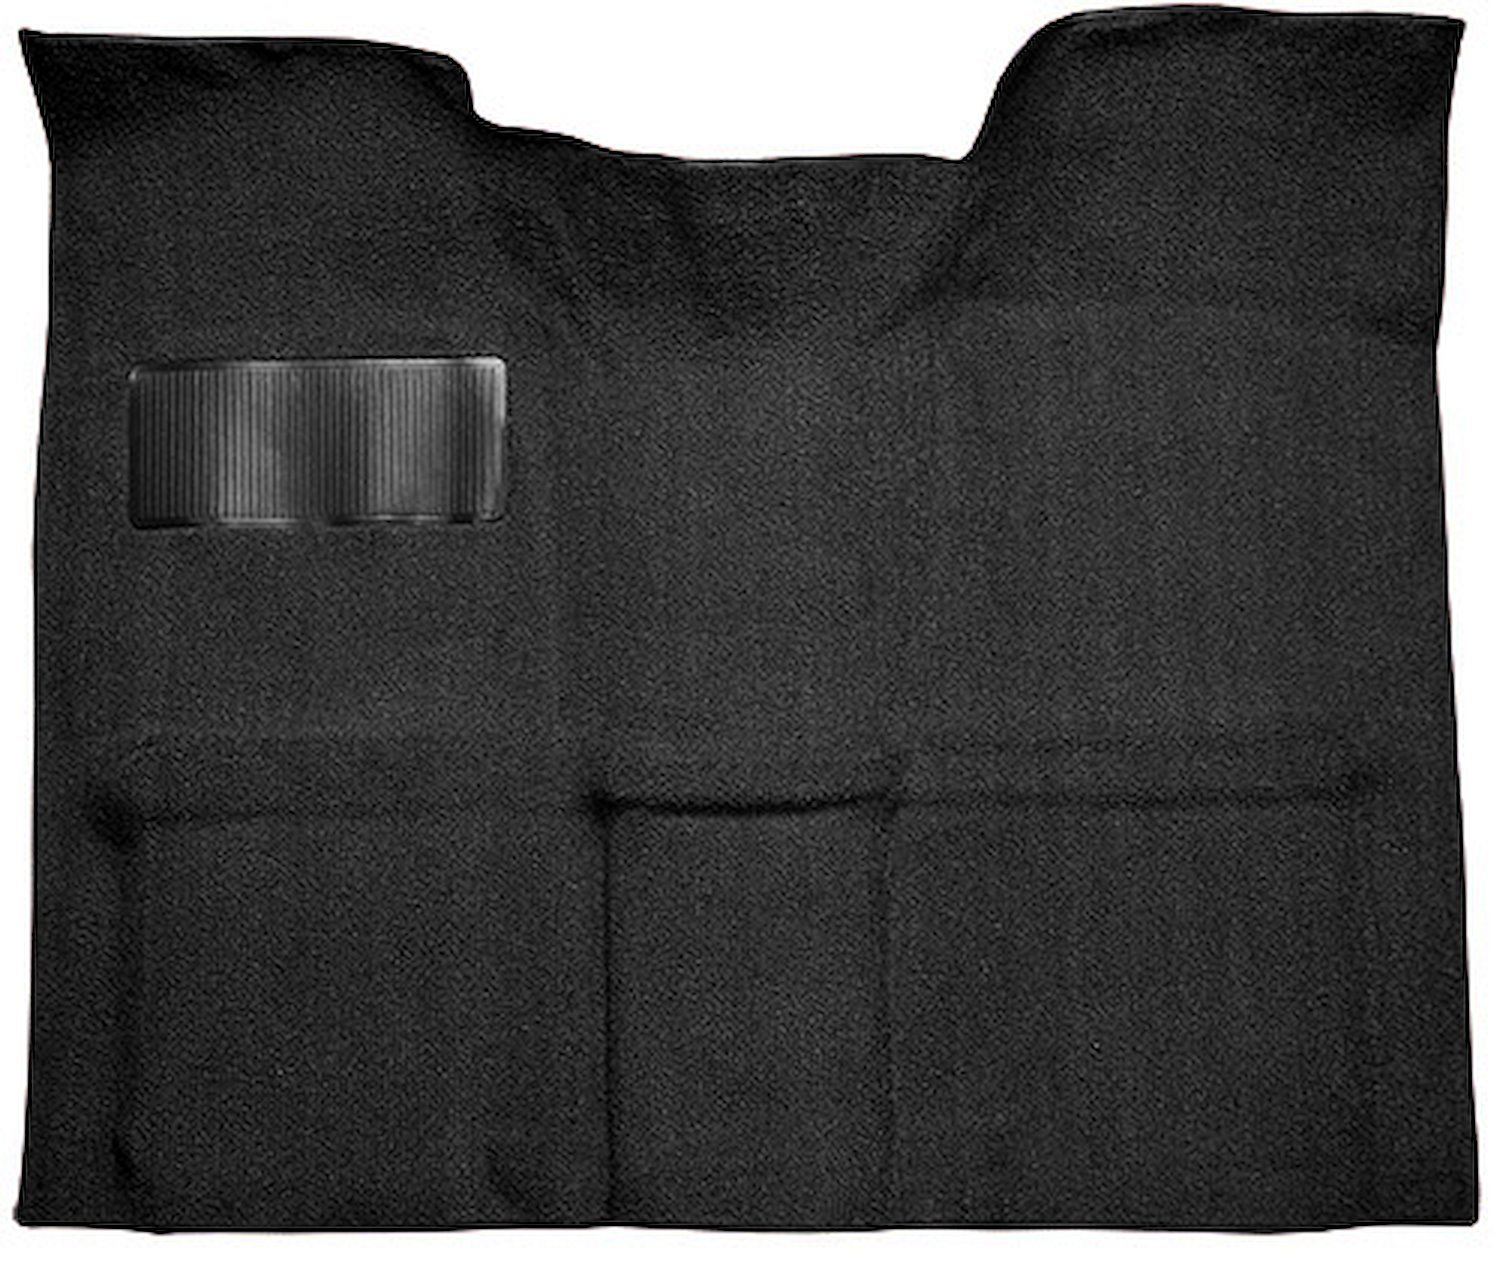 Molded Loop Carpet for 1967-1972 GM C Series Regular Cab Truck w/Auto/3-Speed Manual [Mass Backing, Black]